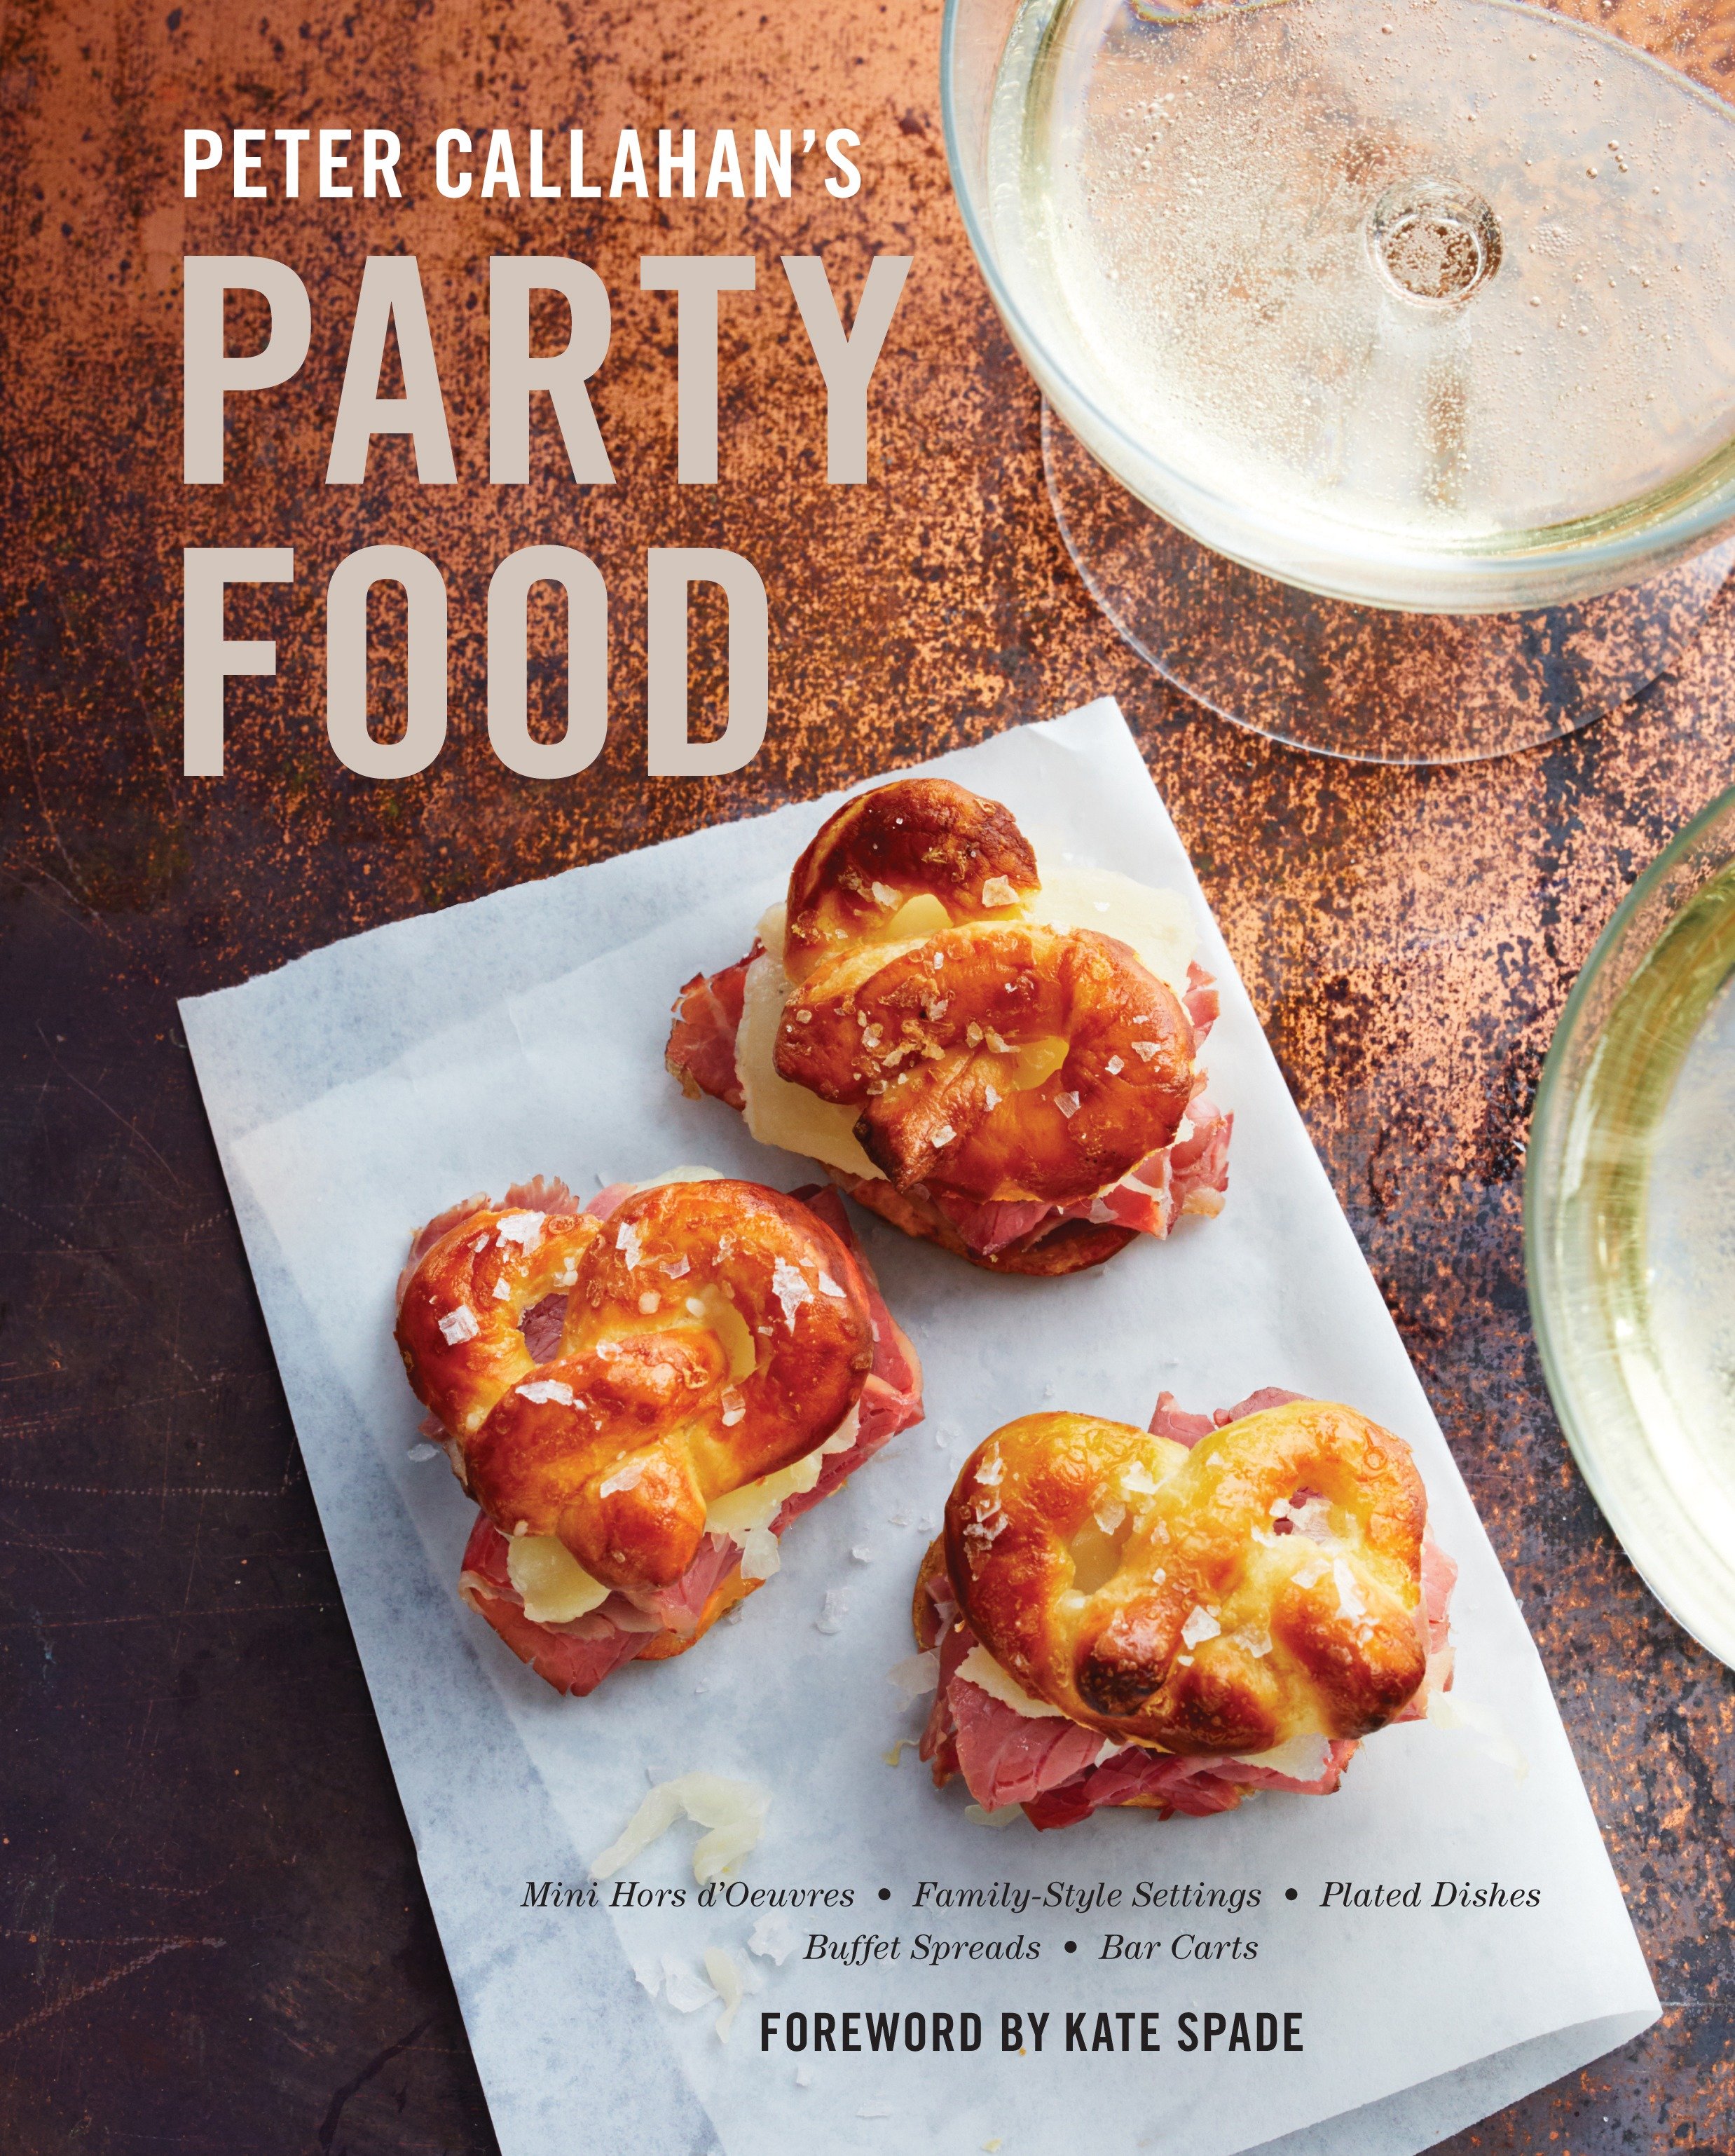 Peter Callahan's party food cover image